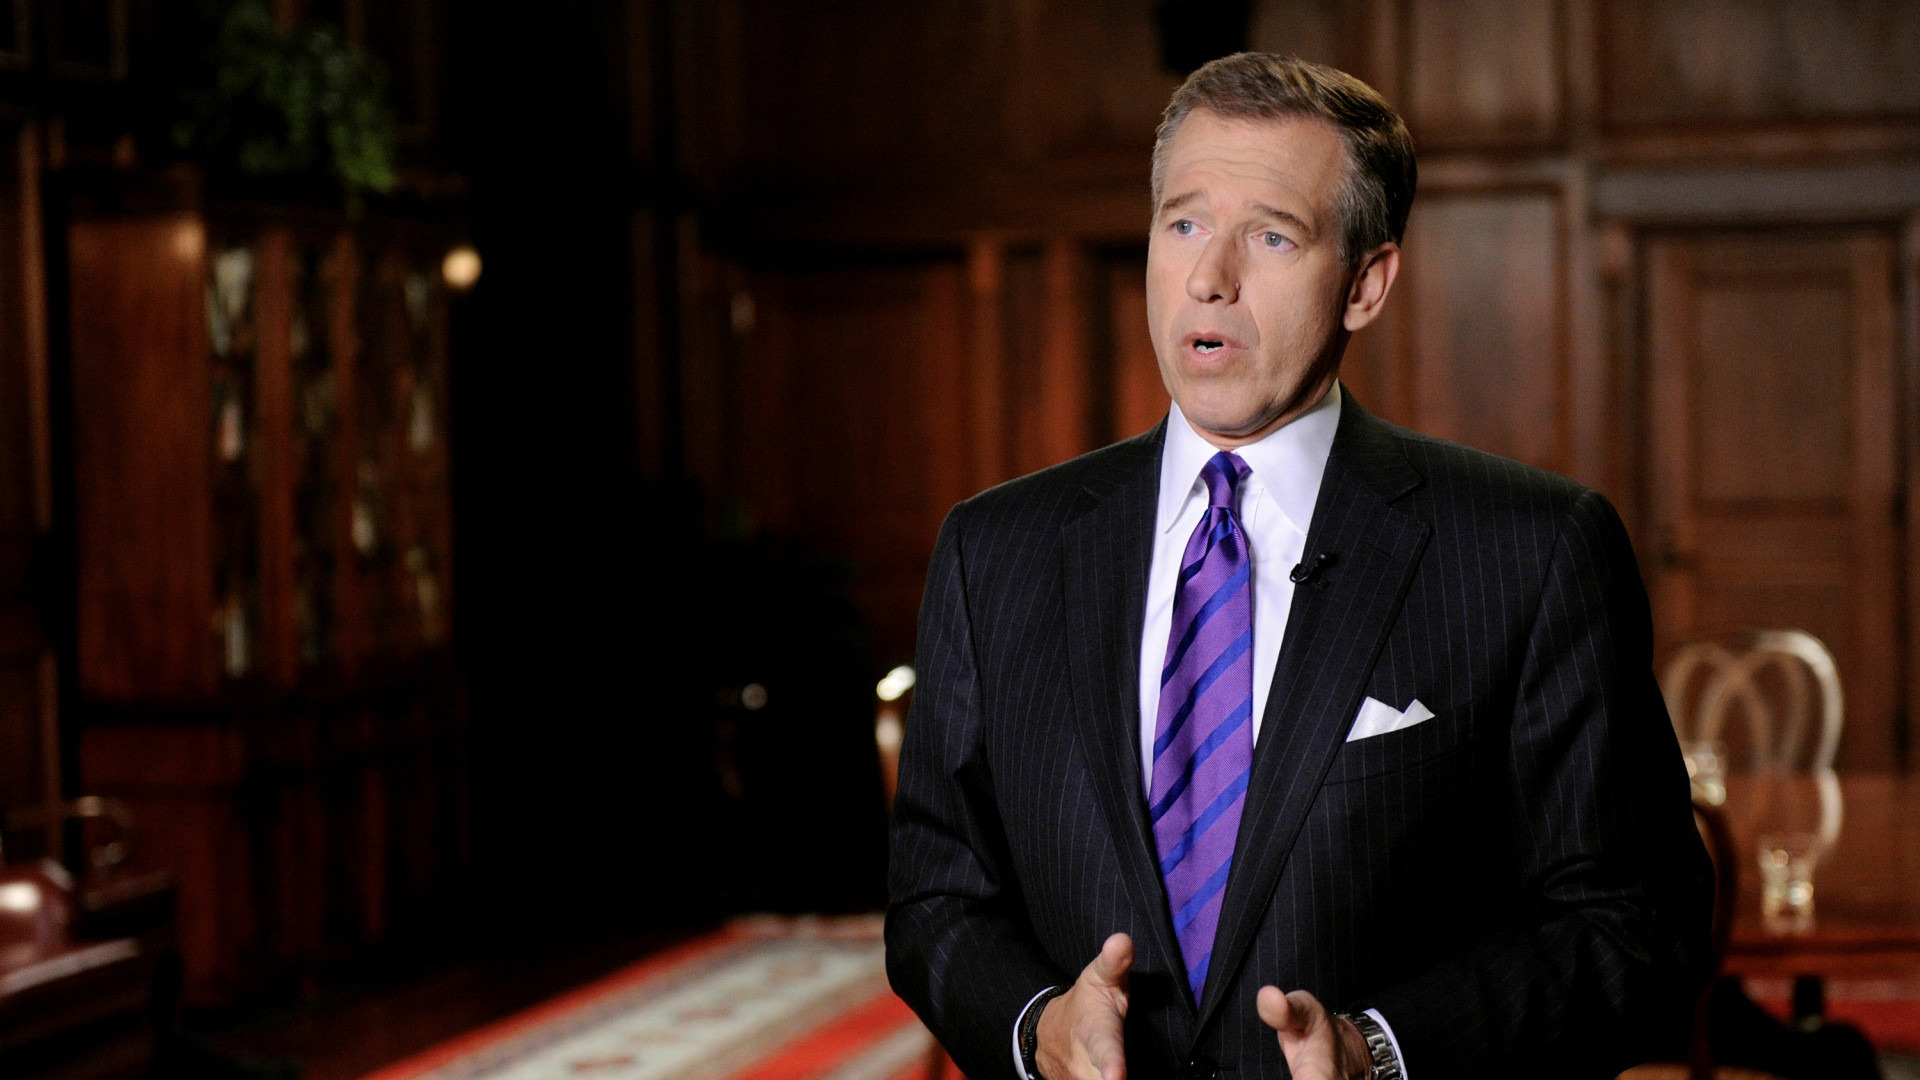 Show Rock Center with Brian Williams